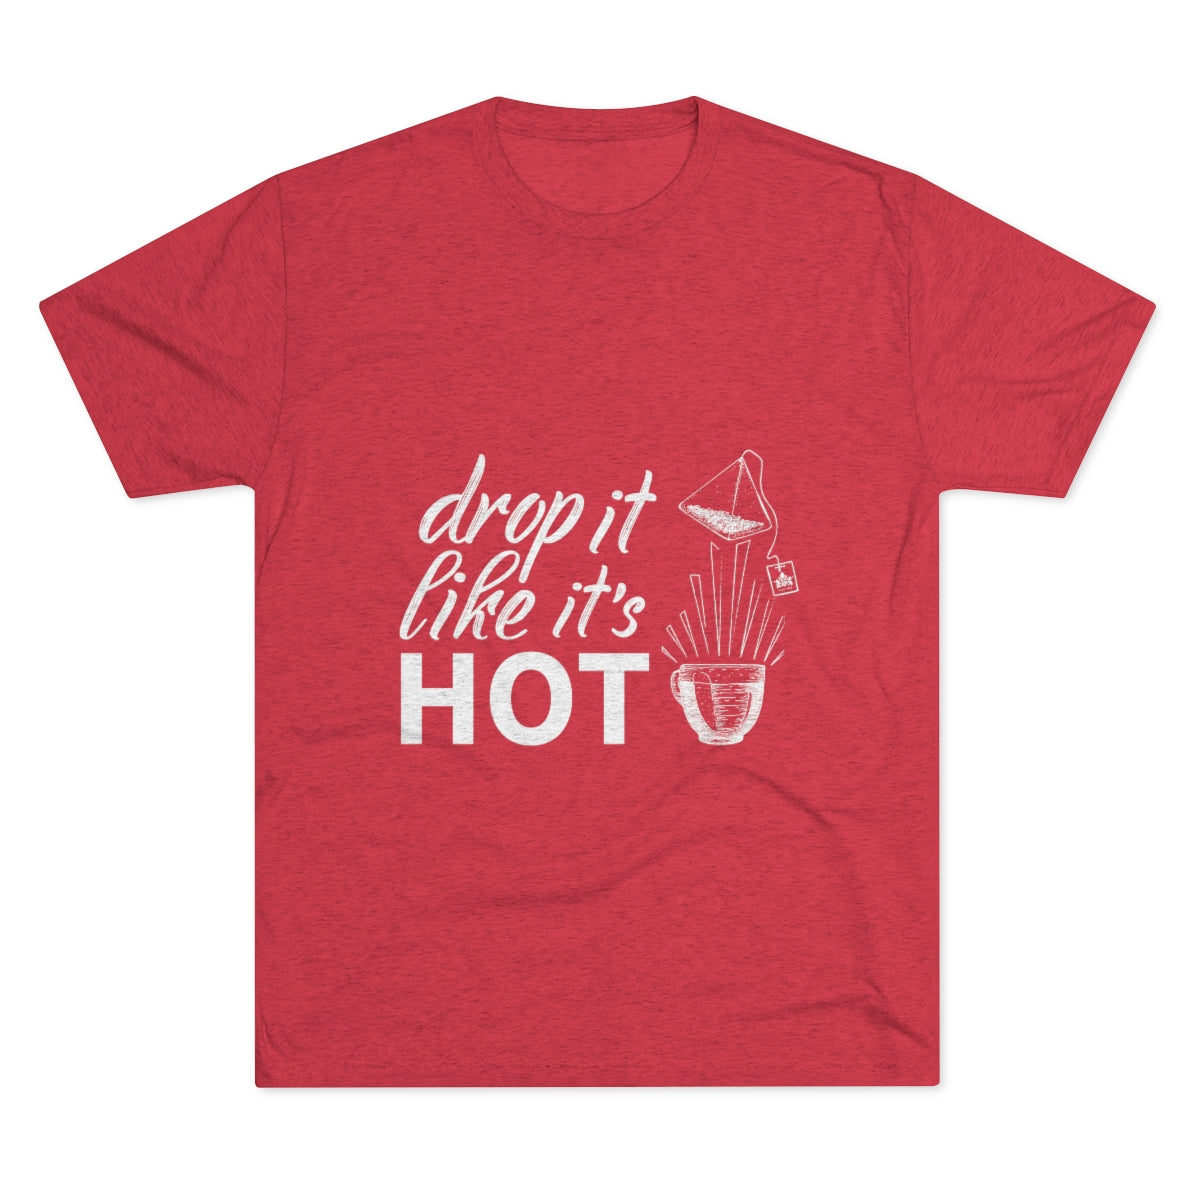 Drop It Like It's Hot Graphic Tee - Tri-Blend Vintage Red S - Harney & Sons Fine Teas